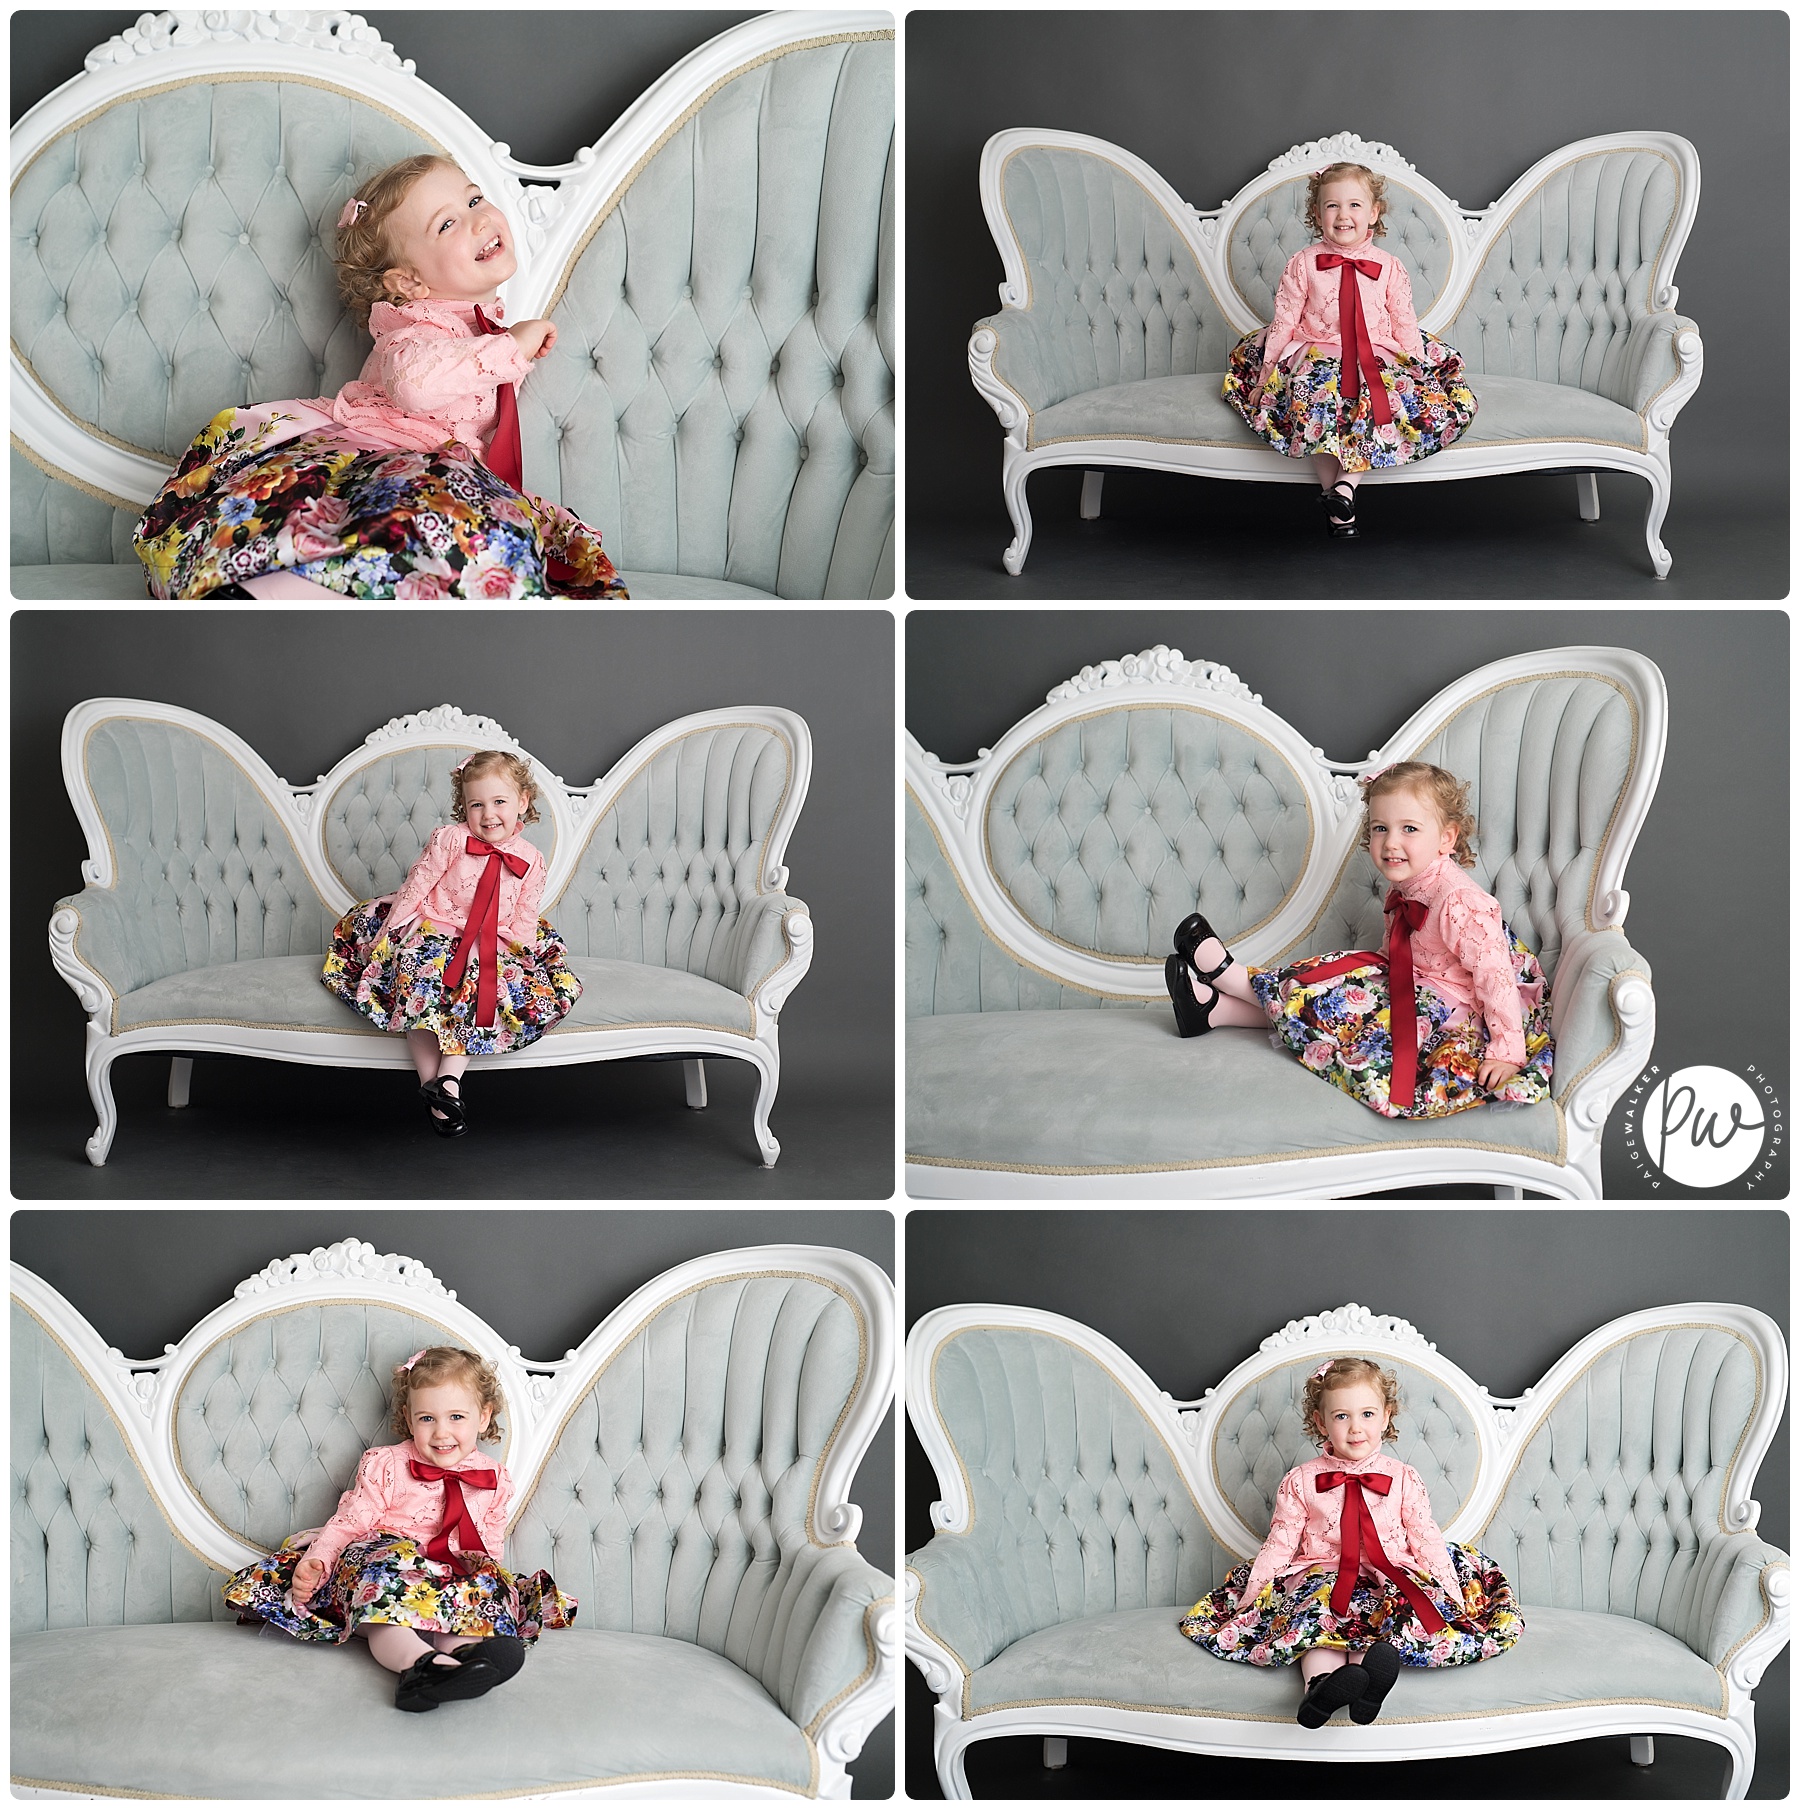 little girl making funny faces on a couch